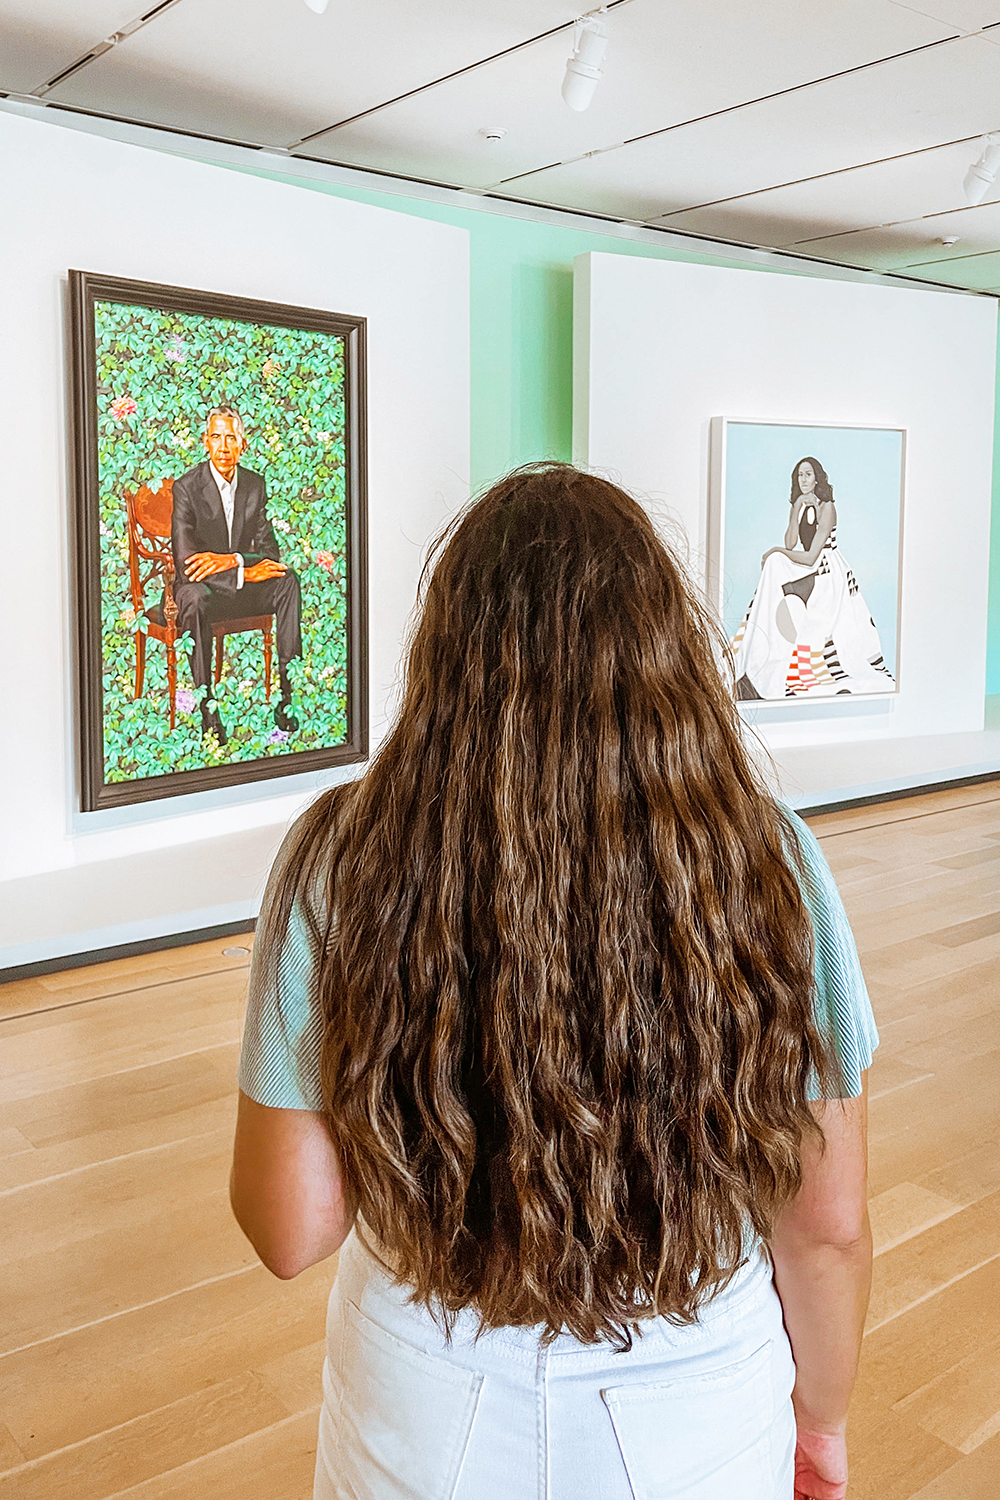 the back of a Lauryncake's head showing her long, brunette, naturally curly hair while she looks at the Obama portraits at the Art Institute of Chicago